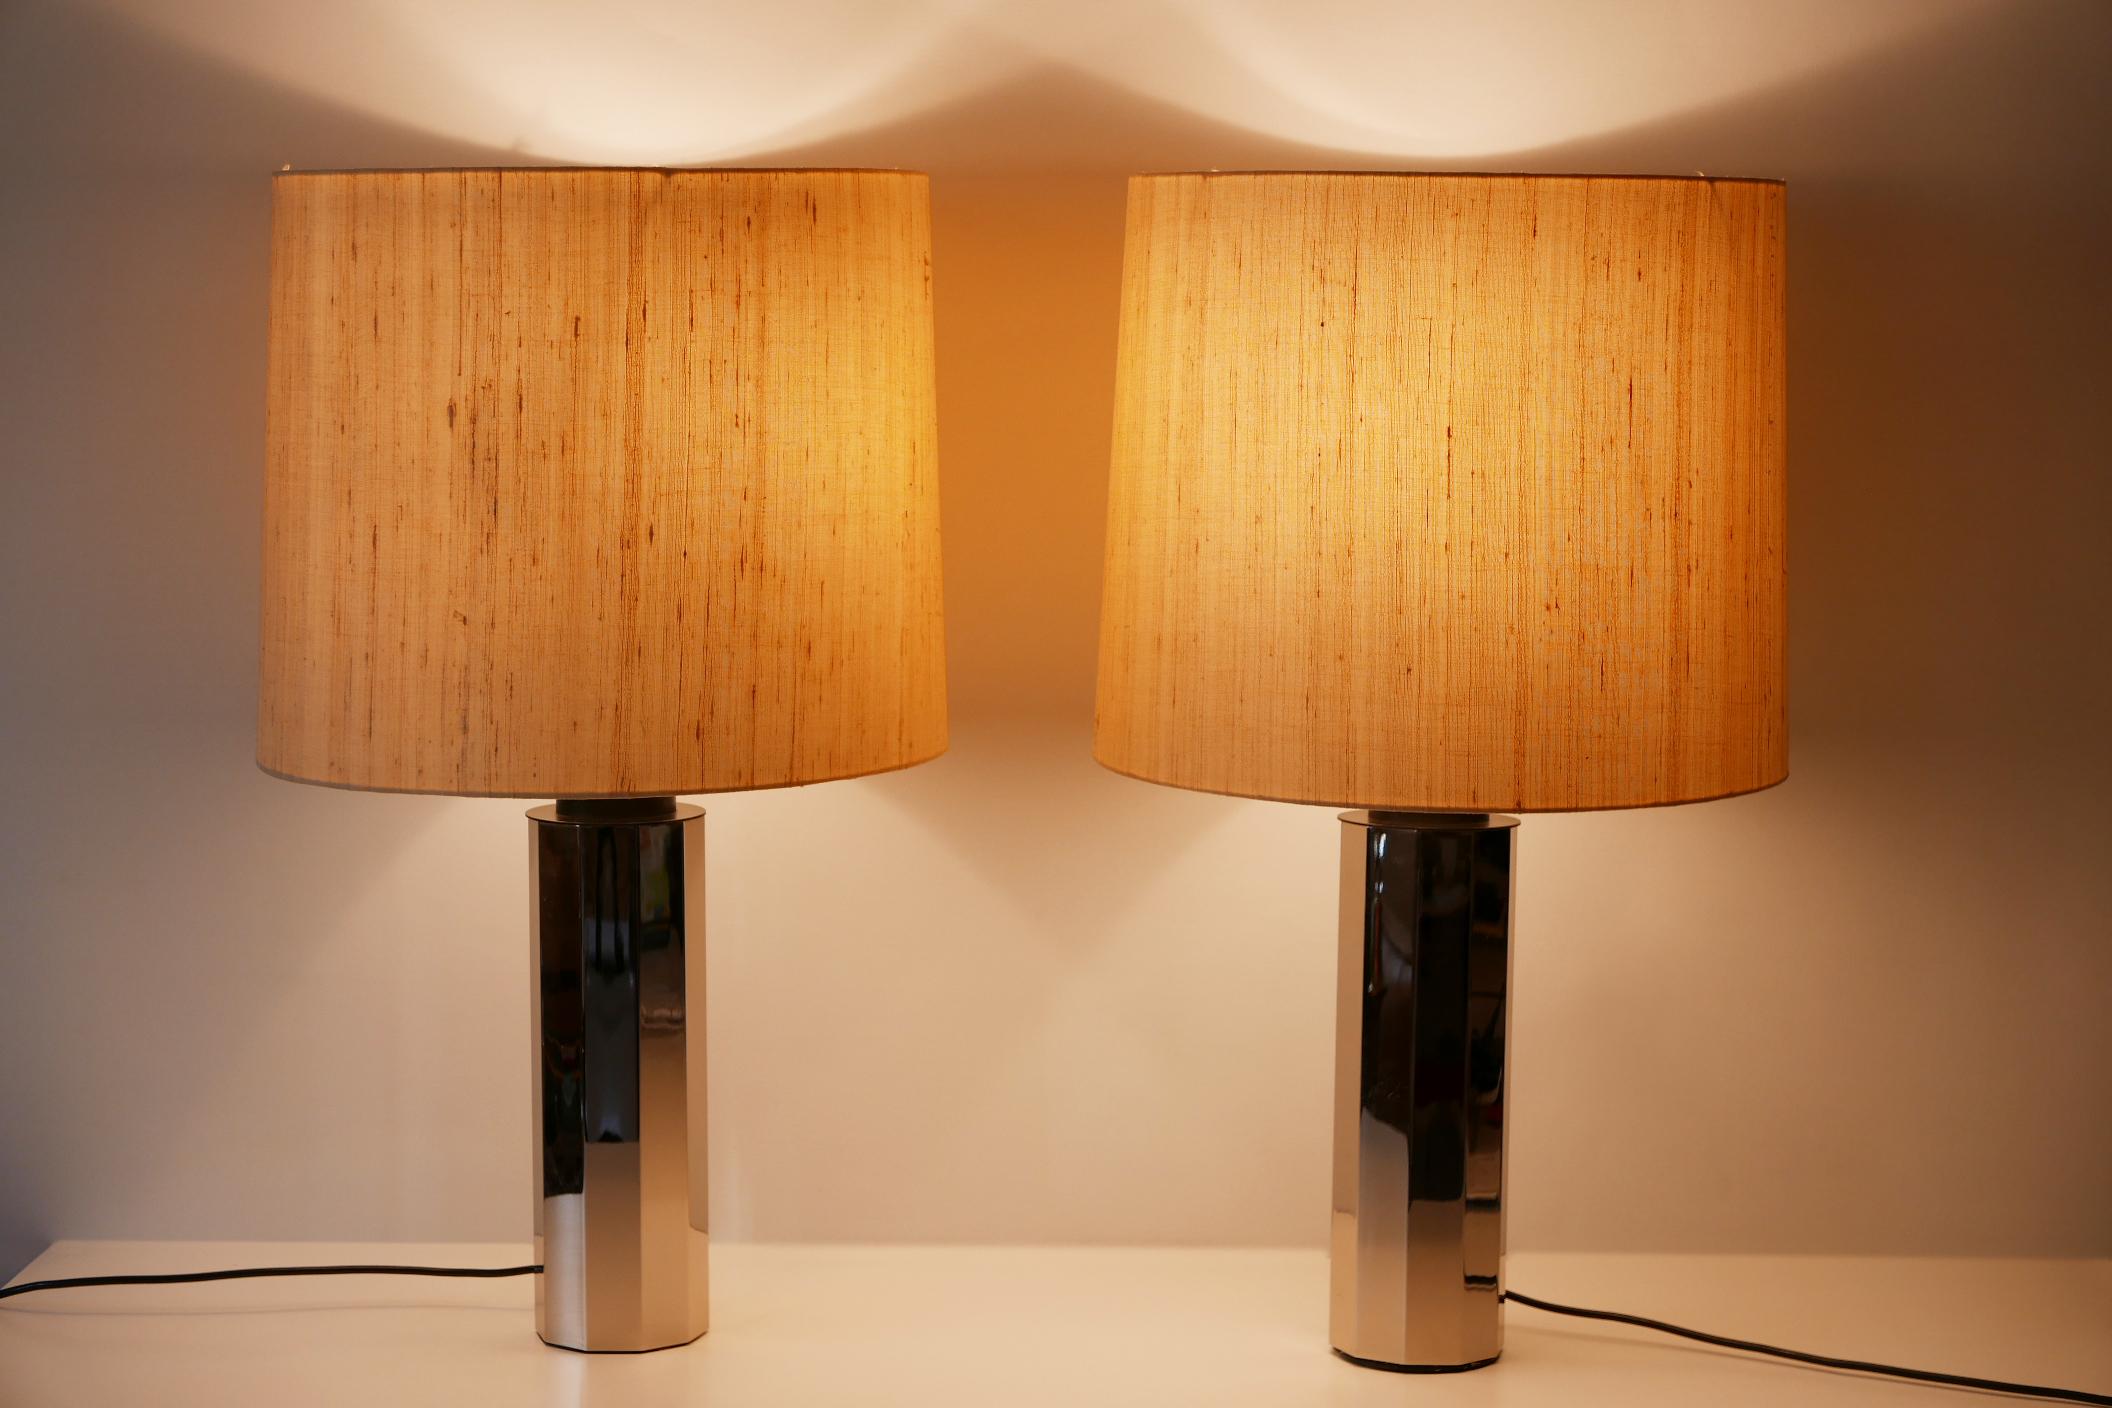 Set of Two Huge, 5-Flamed Midcentury Decagonal Chrome Table Lamps 1960s, Germany For Sale 5